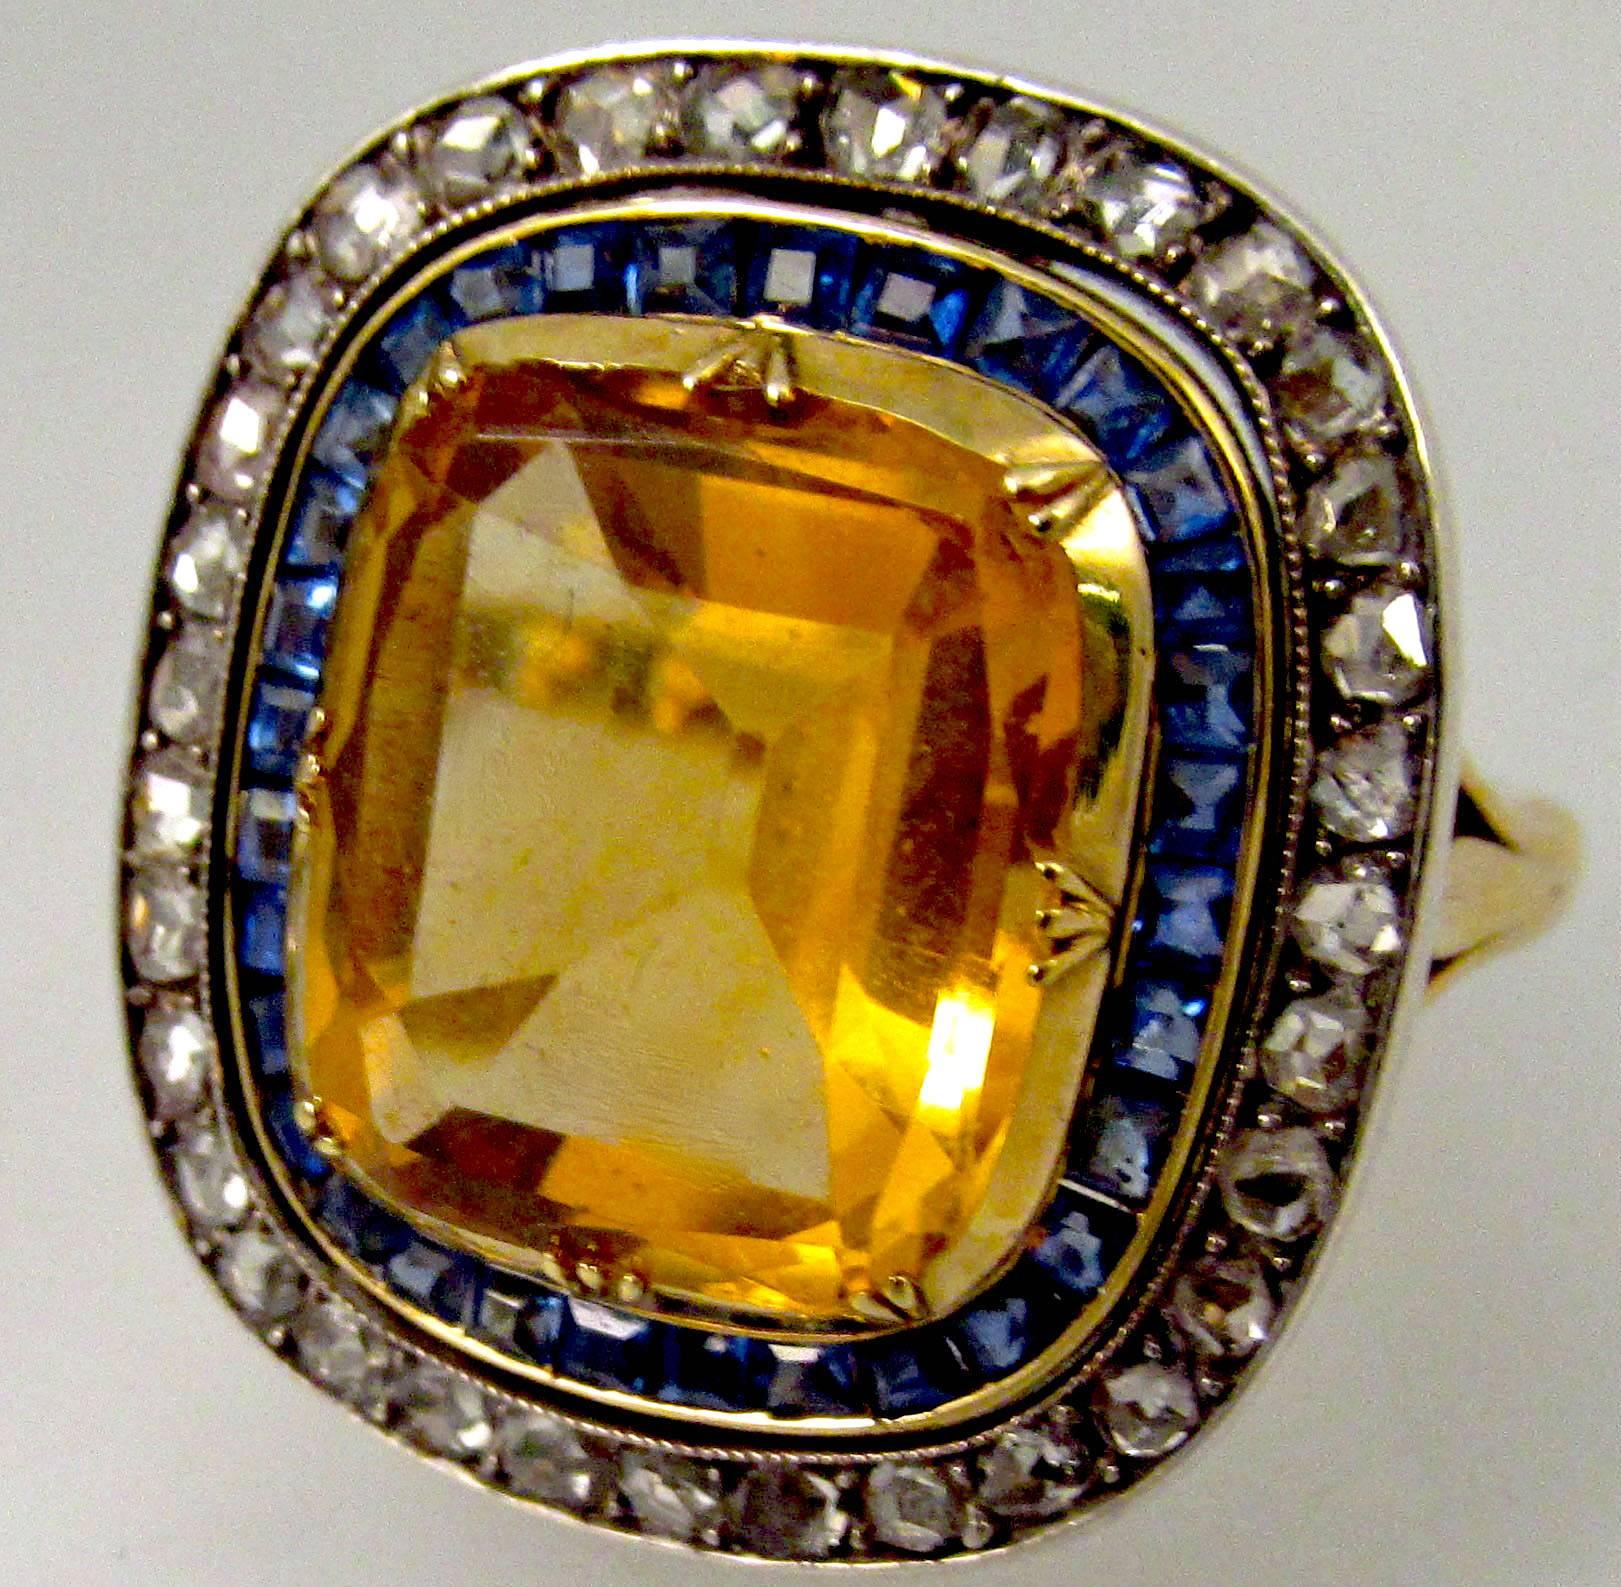 Bold  citrine ring surrounded by sapphires and diamonds set in 18K gold and silver. In addition, the ring comes with a pearl necklace and tools to  change the ring into the clasp for the necklace. An amazing piece of work. The ring is a size 6 3/4